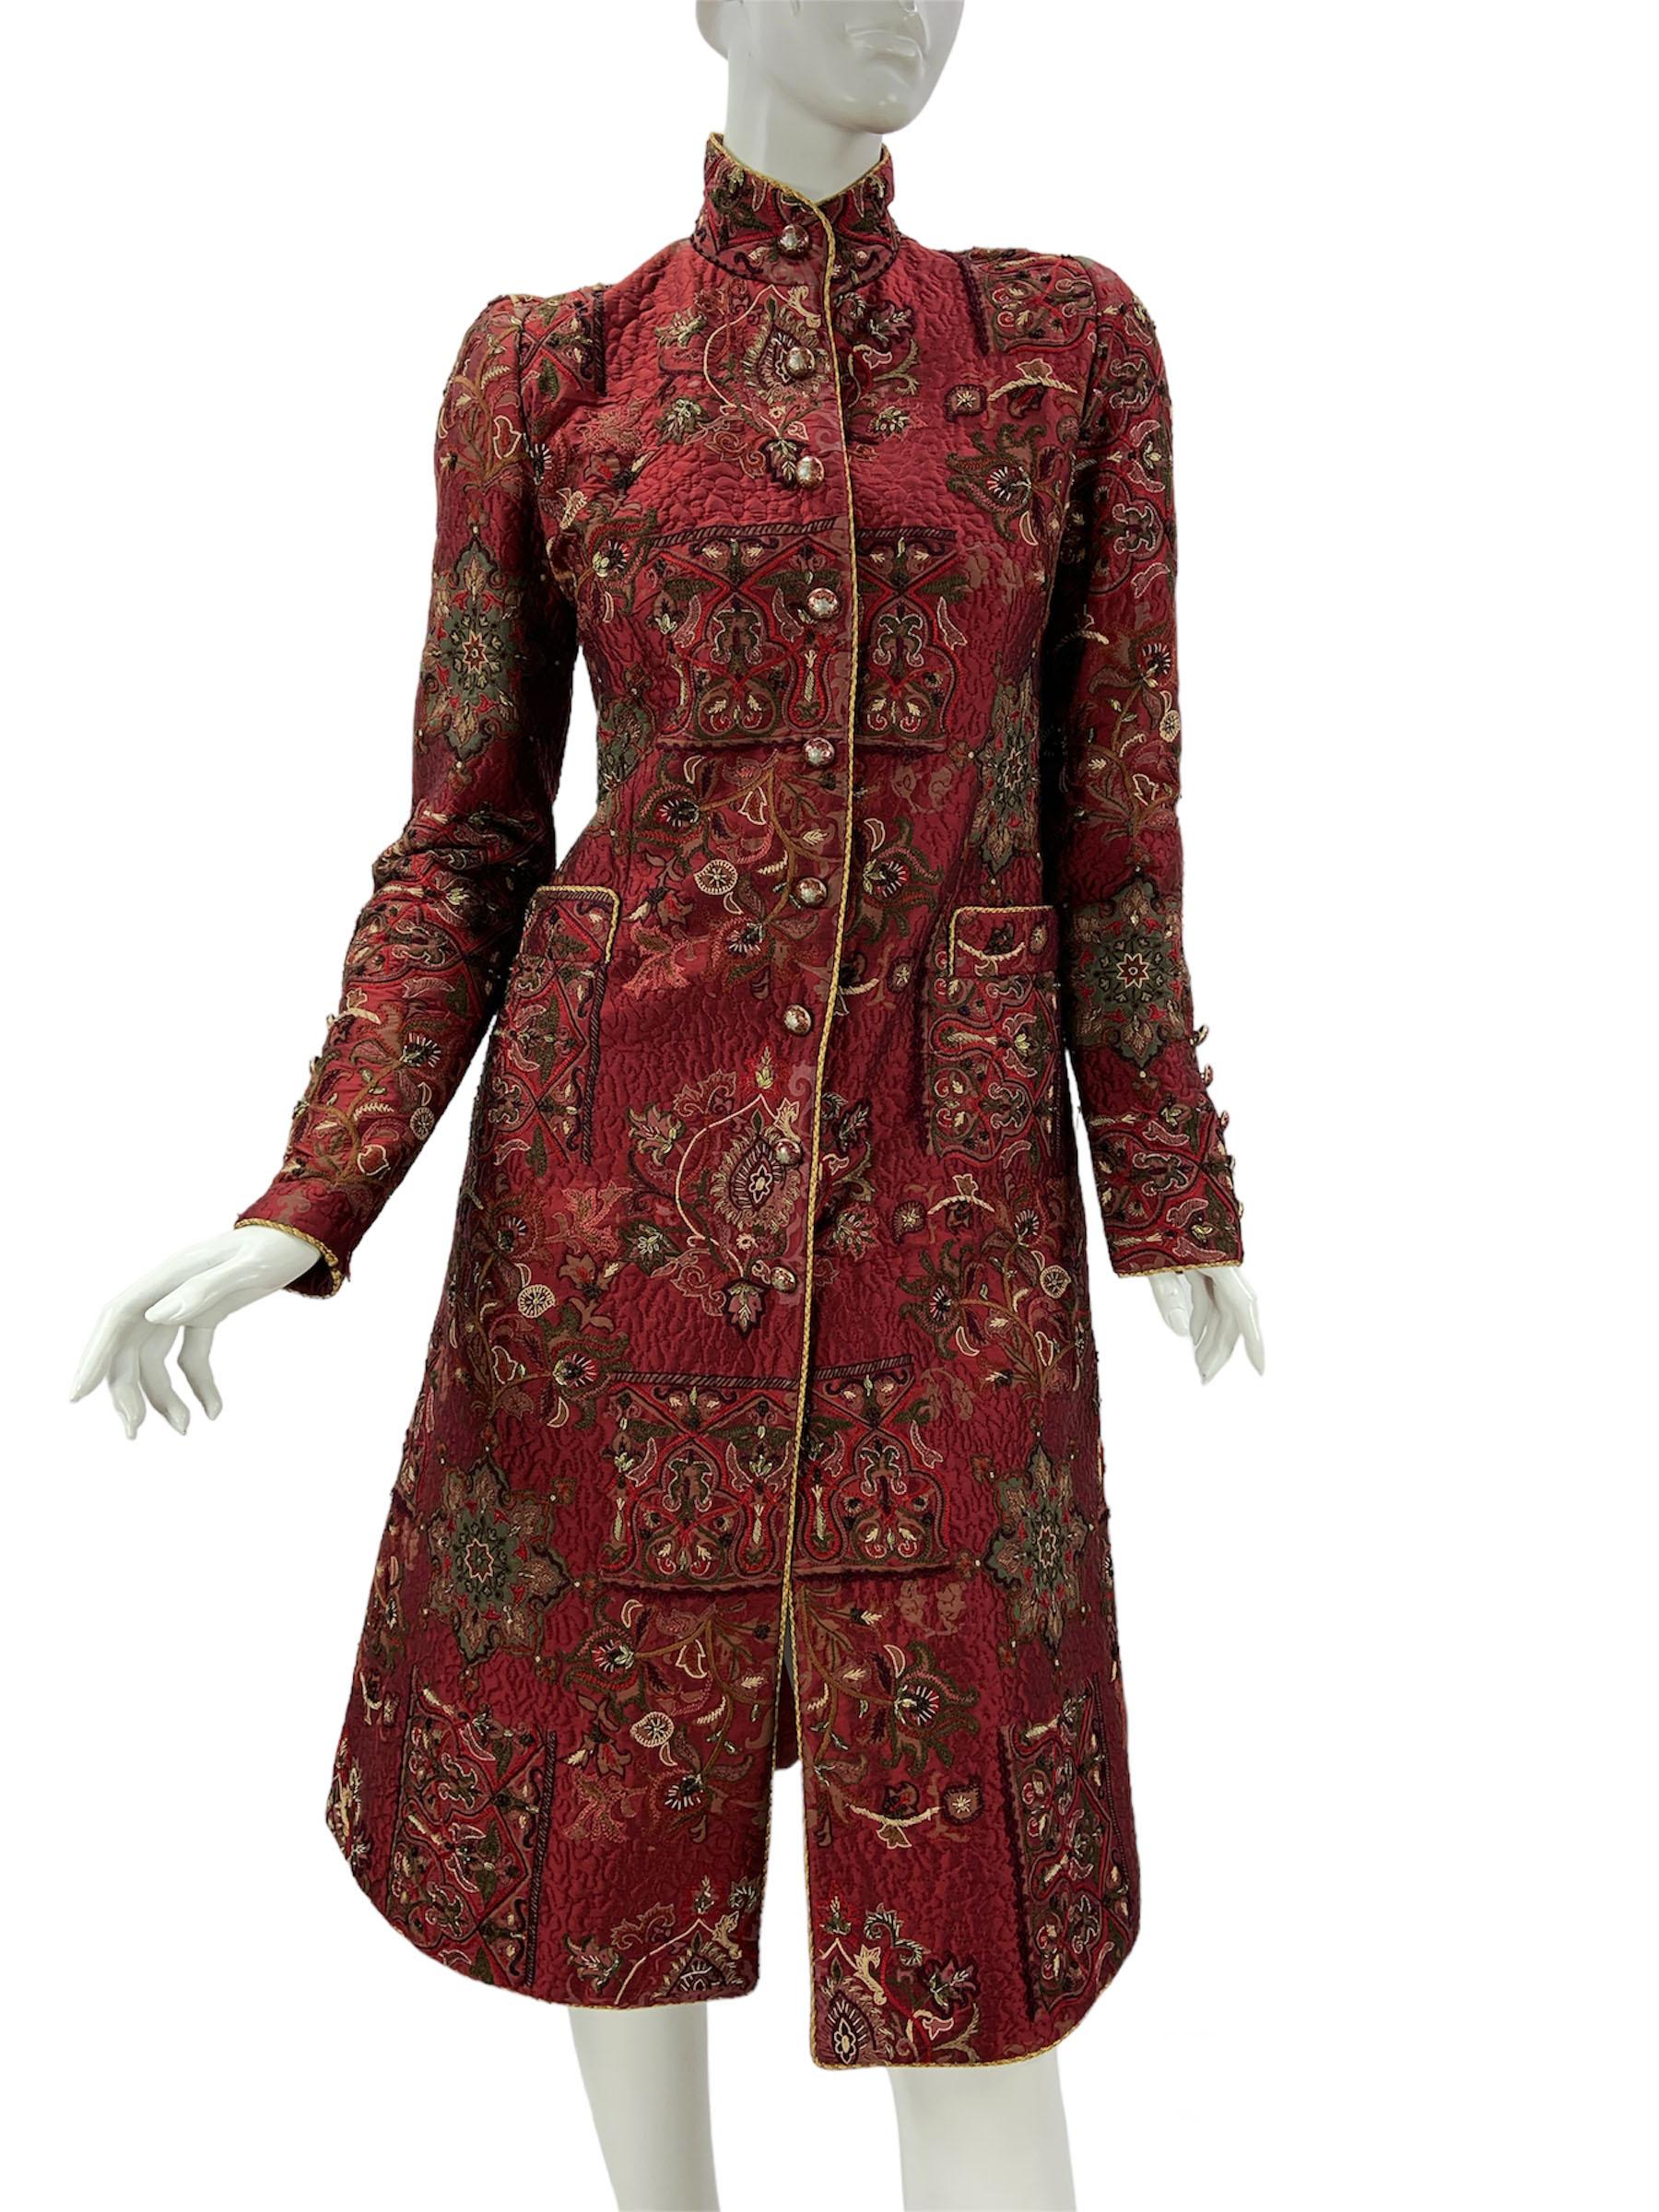 Oscar de la Renta Silk Burgundy Quilted Embellished Coat
US size - 4
Burgundy, lightly quilted silk coat is printed with tapestry inspired motifs that are decorated with elaborate tambour stitching and embroidery, along with brass leaf beads. Coat